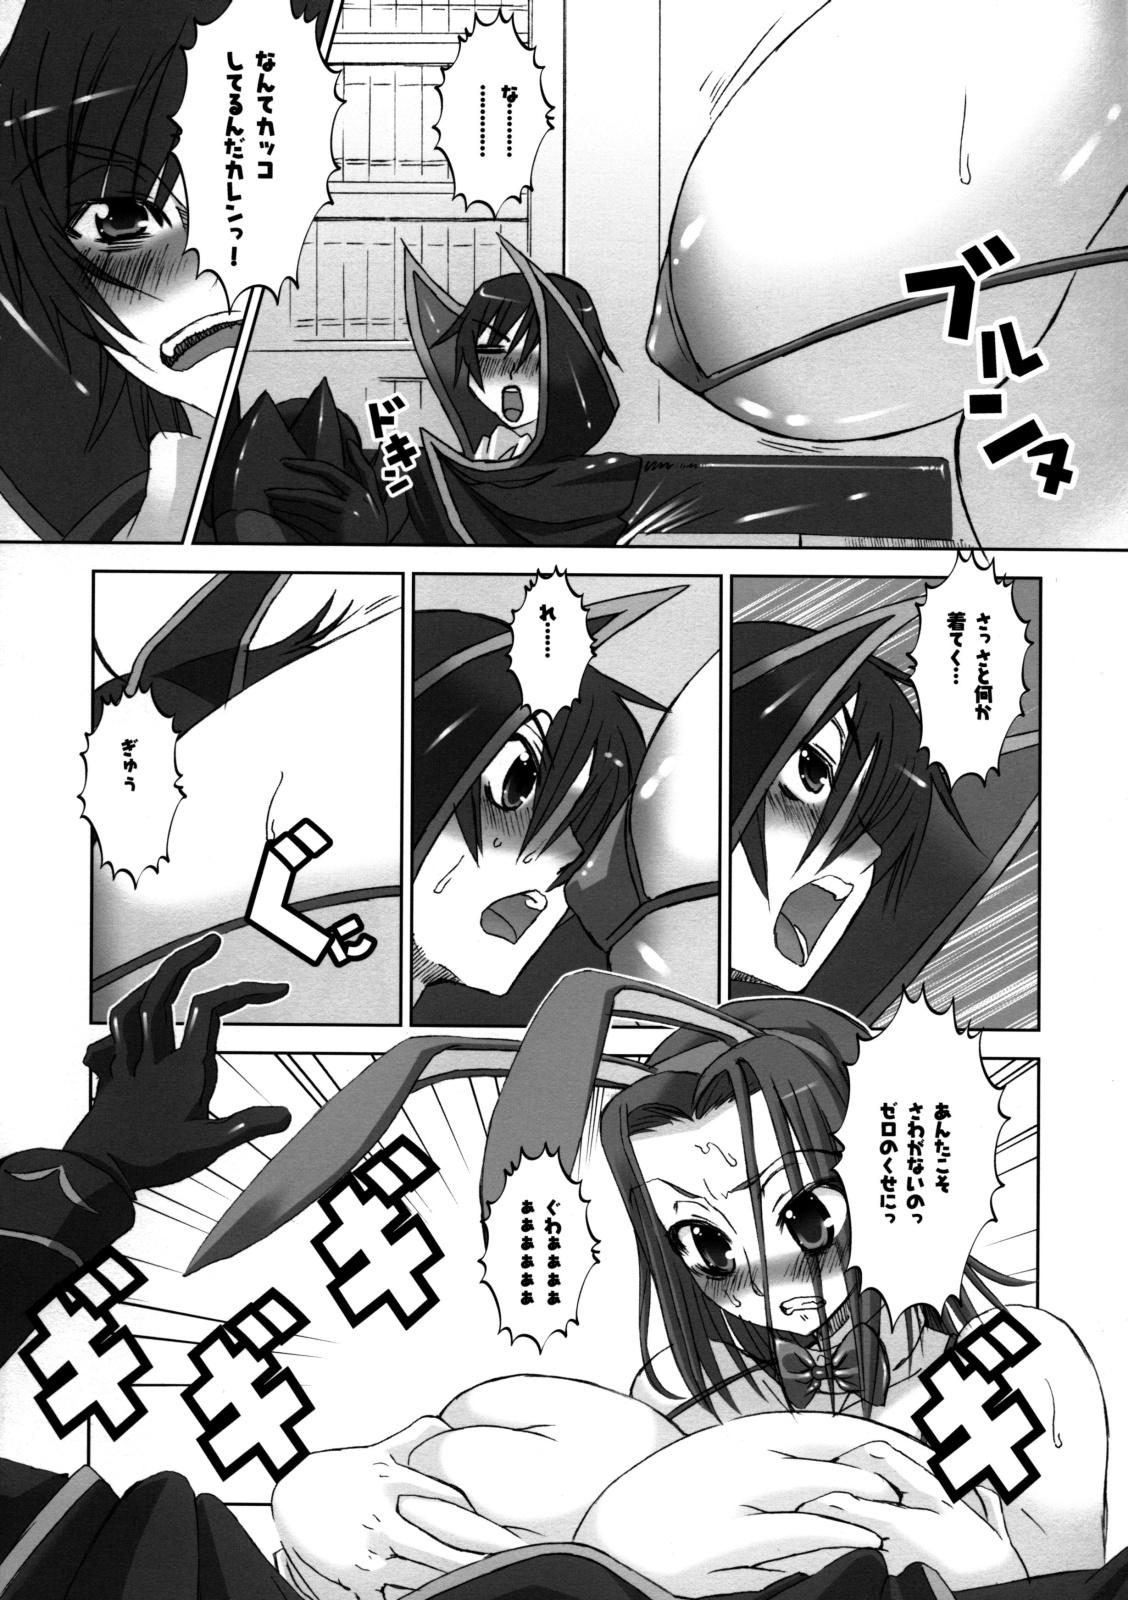 Hot Couple Sex Pleated Gunner #19 - Usamimi Girl - Code geass Dom - Page 7